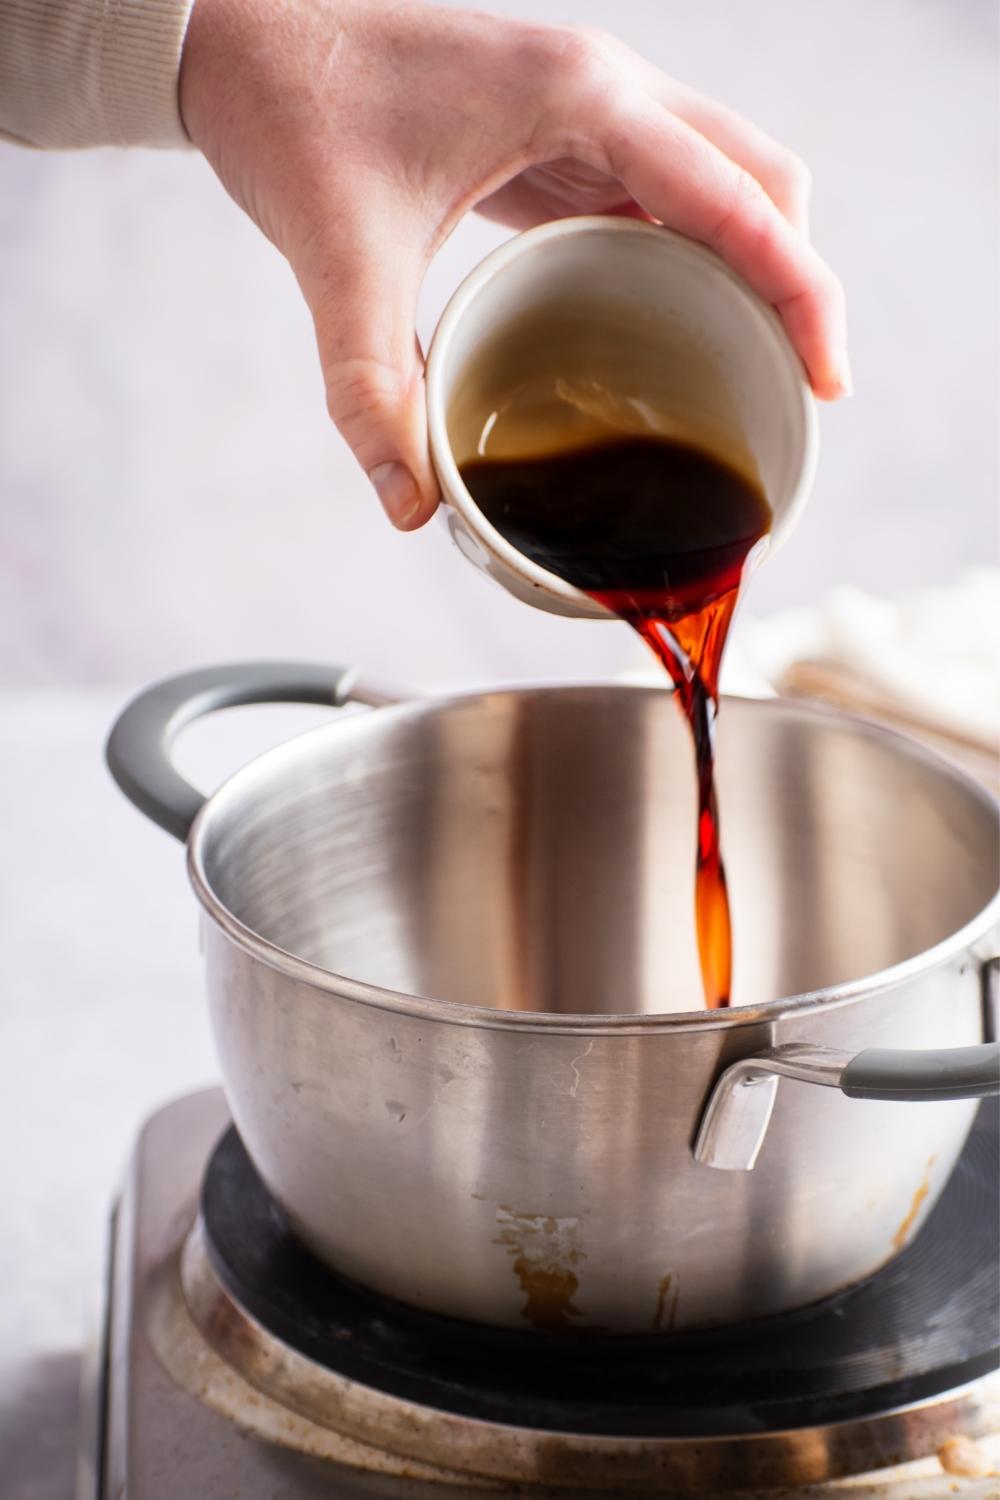 A hand pouring soy sauce into a pot on a burner.